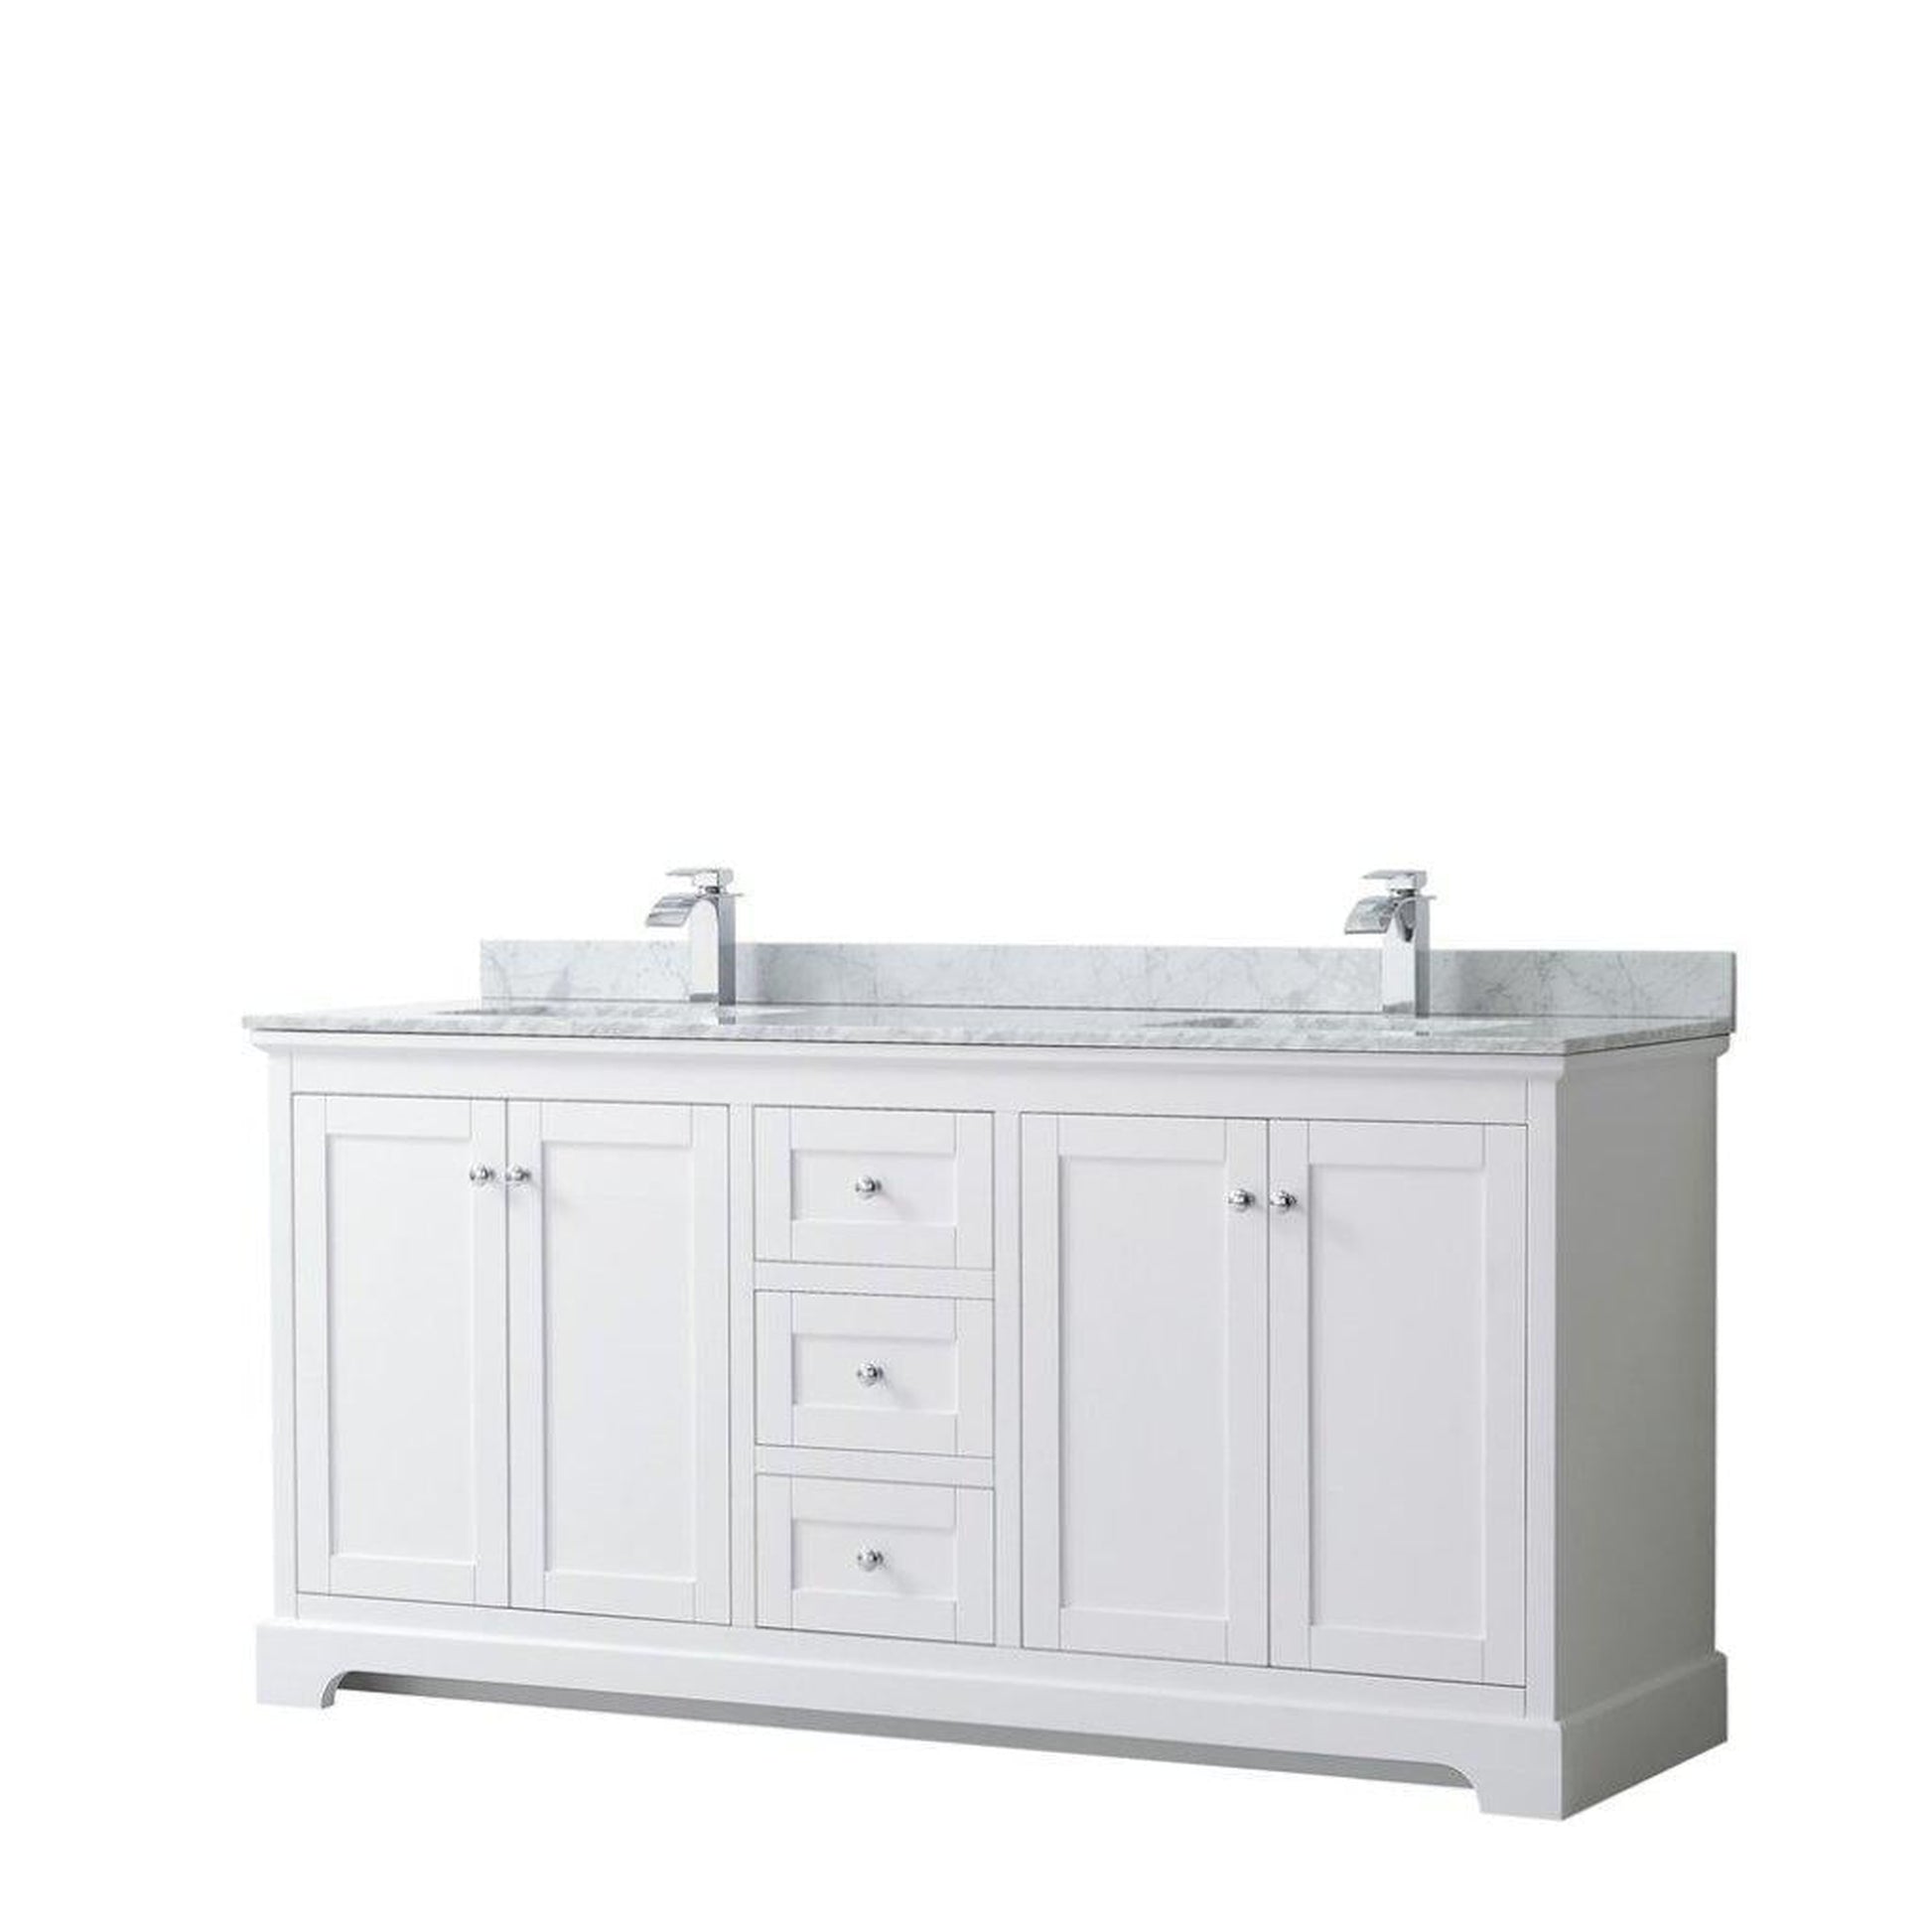 Wyndham Collection Avery 72" White Double Bathroom Vanity, White Carrara Marble Countertop With 1-Hole Faucet, Square Sink, Polished Chrome Trims